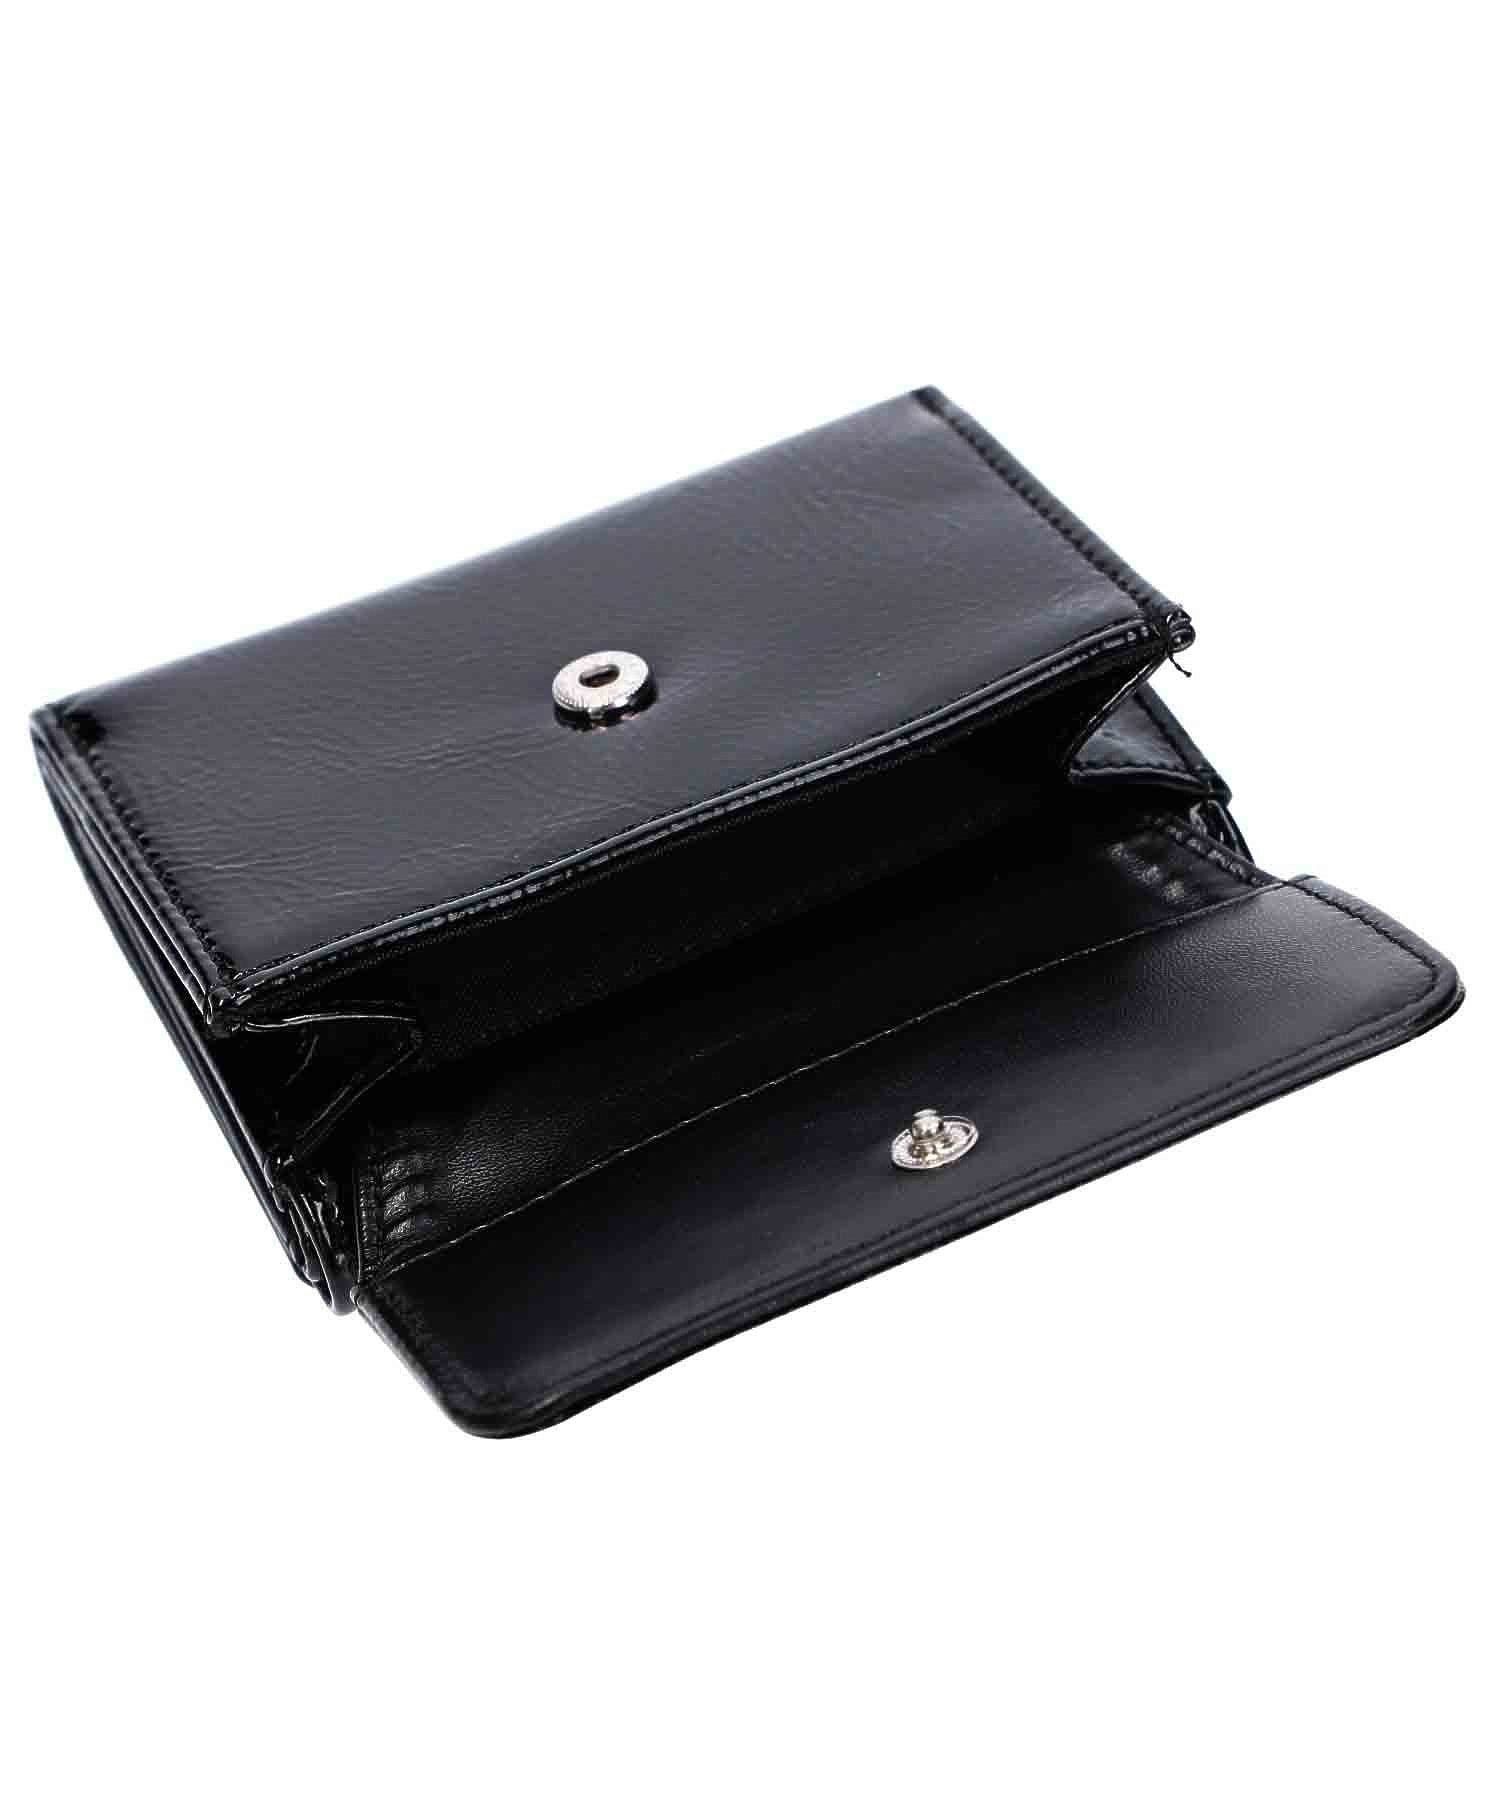 FAUX PATENT LEATHER MINI WALLET X-girl